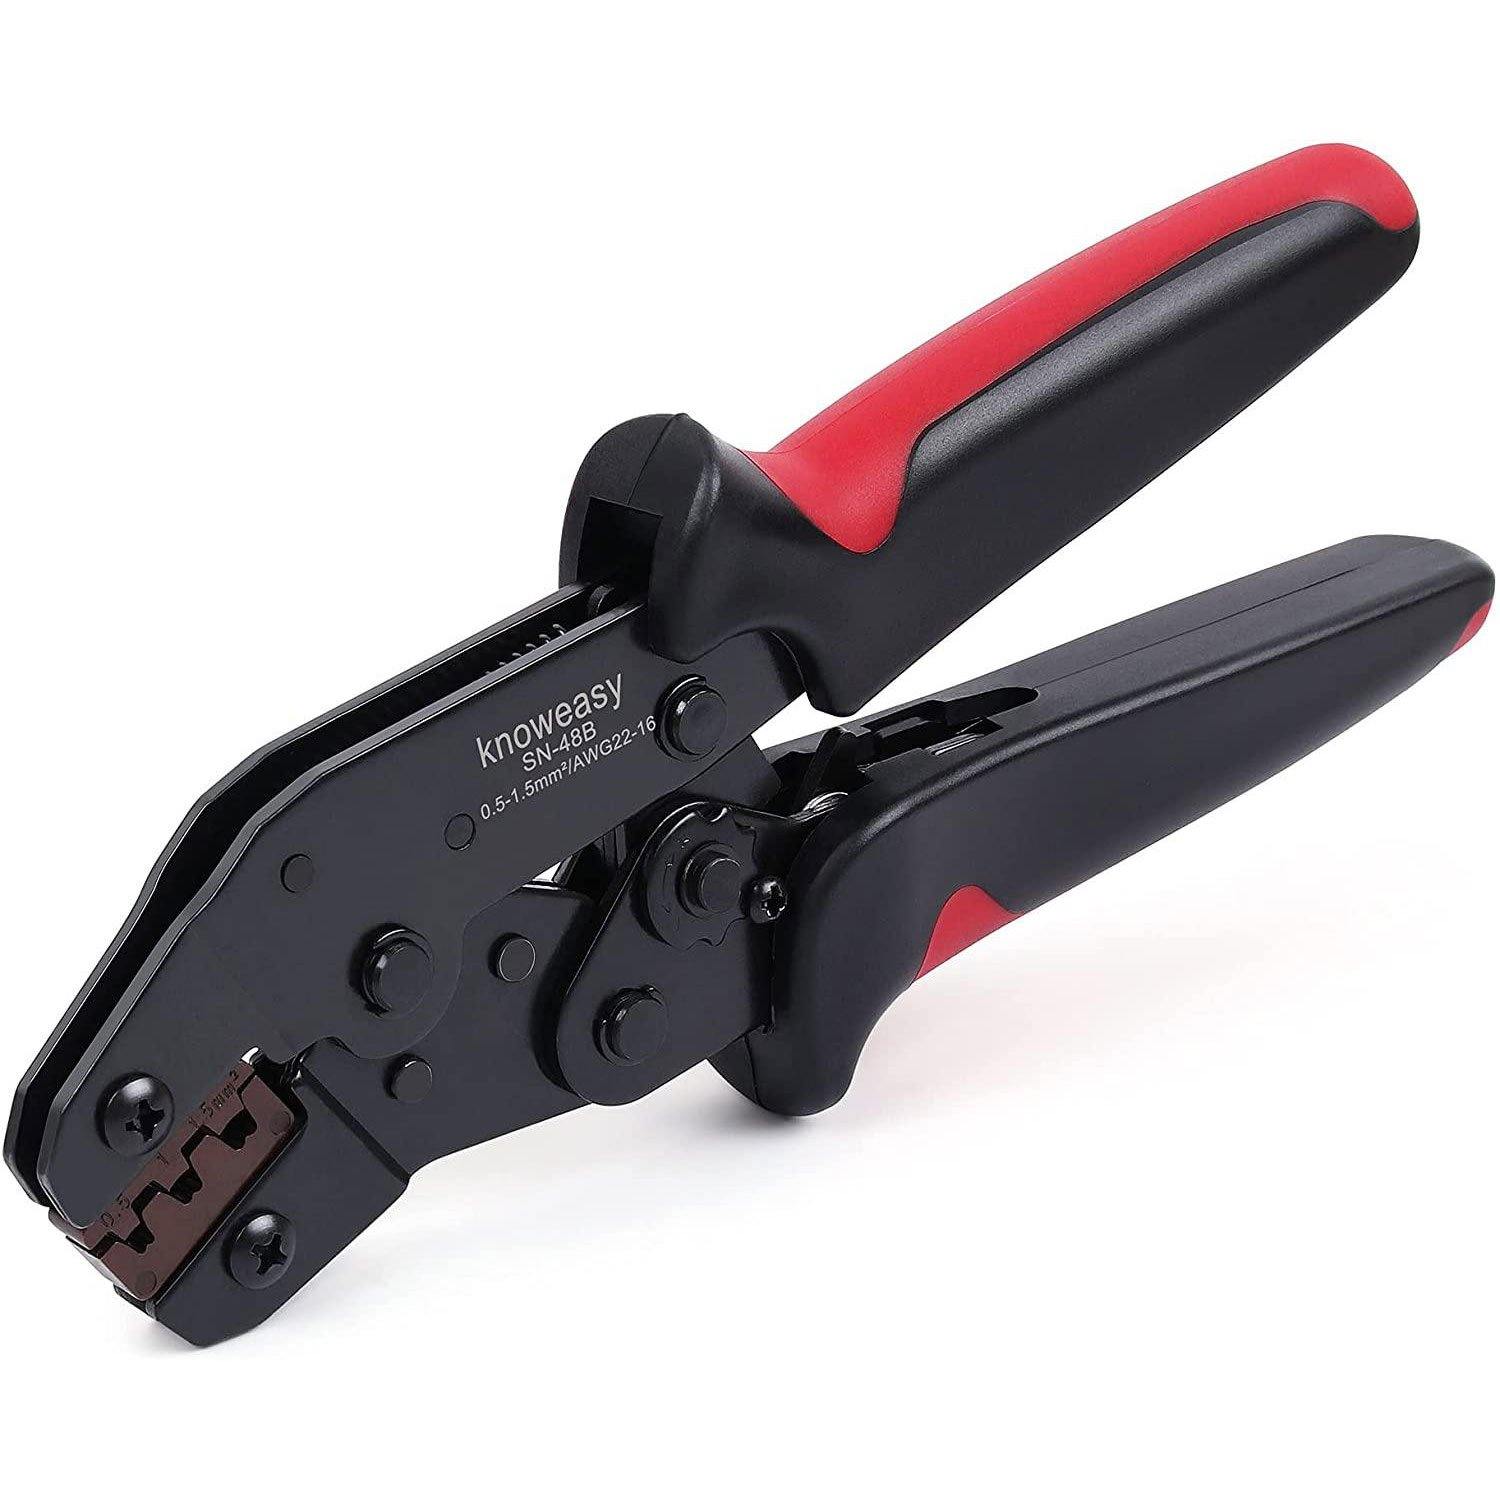 Non-Insulated Terminal Crimping Tool,Knoweasy Ratchet Crimping Tool 5.5-38  mm² (AWG10-2) for Non-Insulated Terminals and Open Barrel Terminals